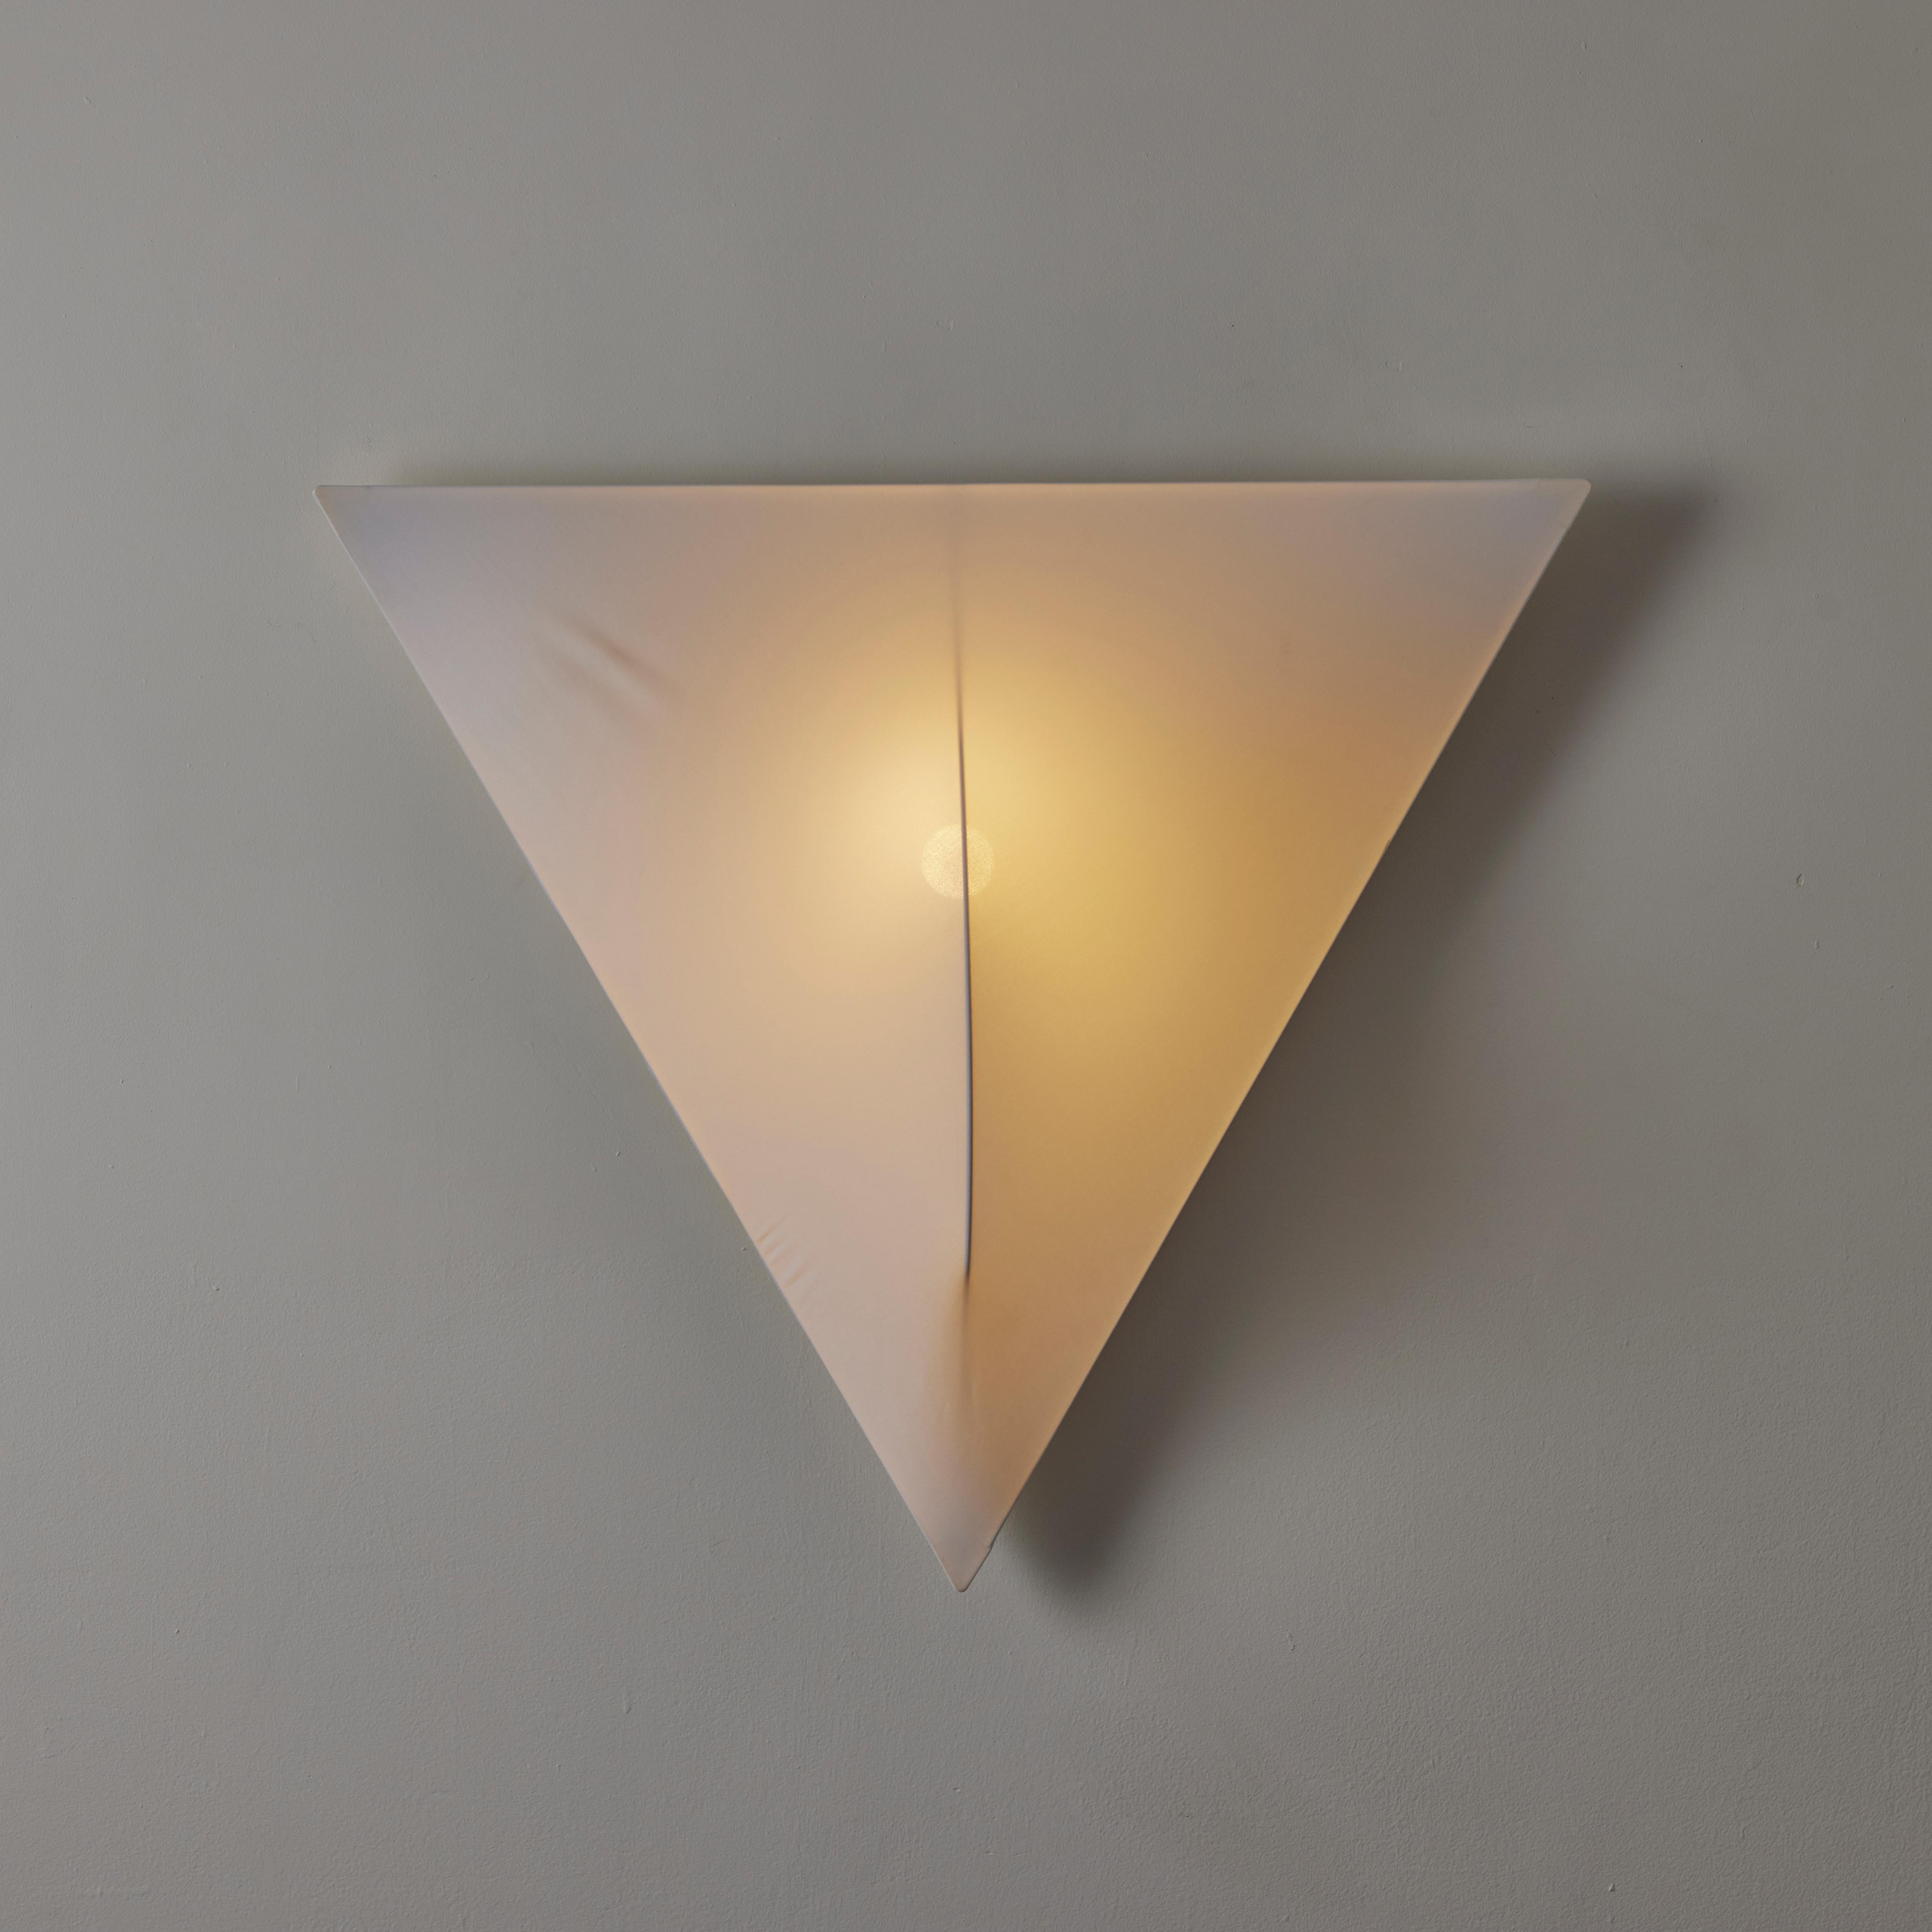 Sanka 2 Wall Light  by Kazuhide Takahama for Sirrah. Designed and manufactured in Italy, circa the 1970s. Dead-stock from Sirrah. Triangular plastic frame and stretch fabric cloth diffuser. This model variation can be mounted as a sconce, or corner